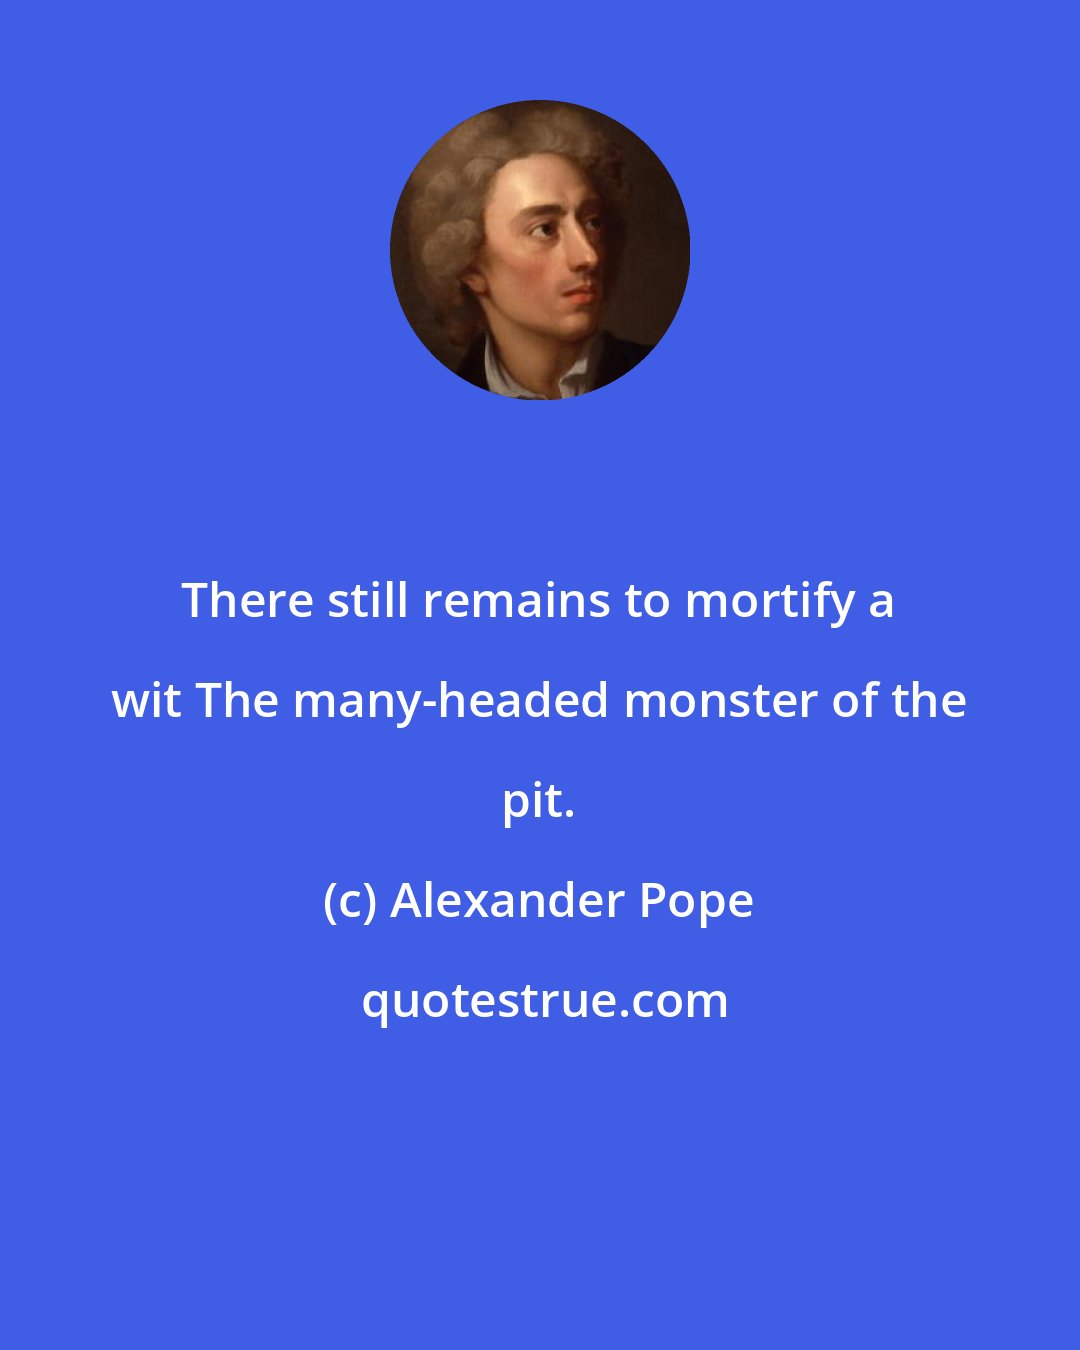 Alexander Pope: There still remains to mortify a wit The many-headed monster of the pit.